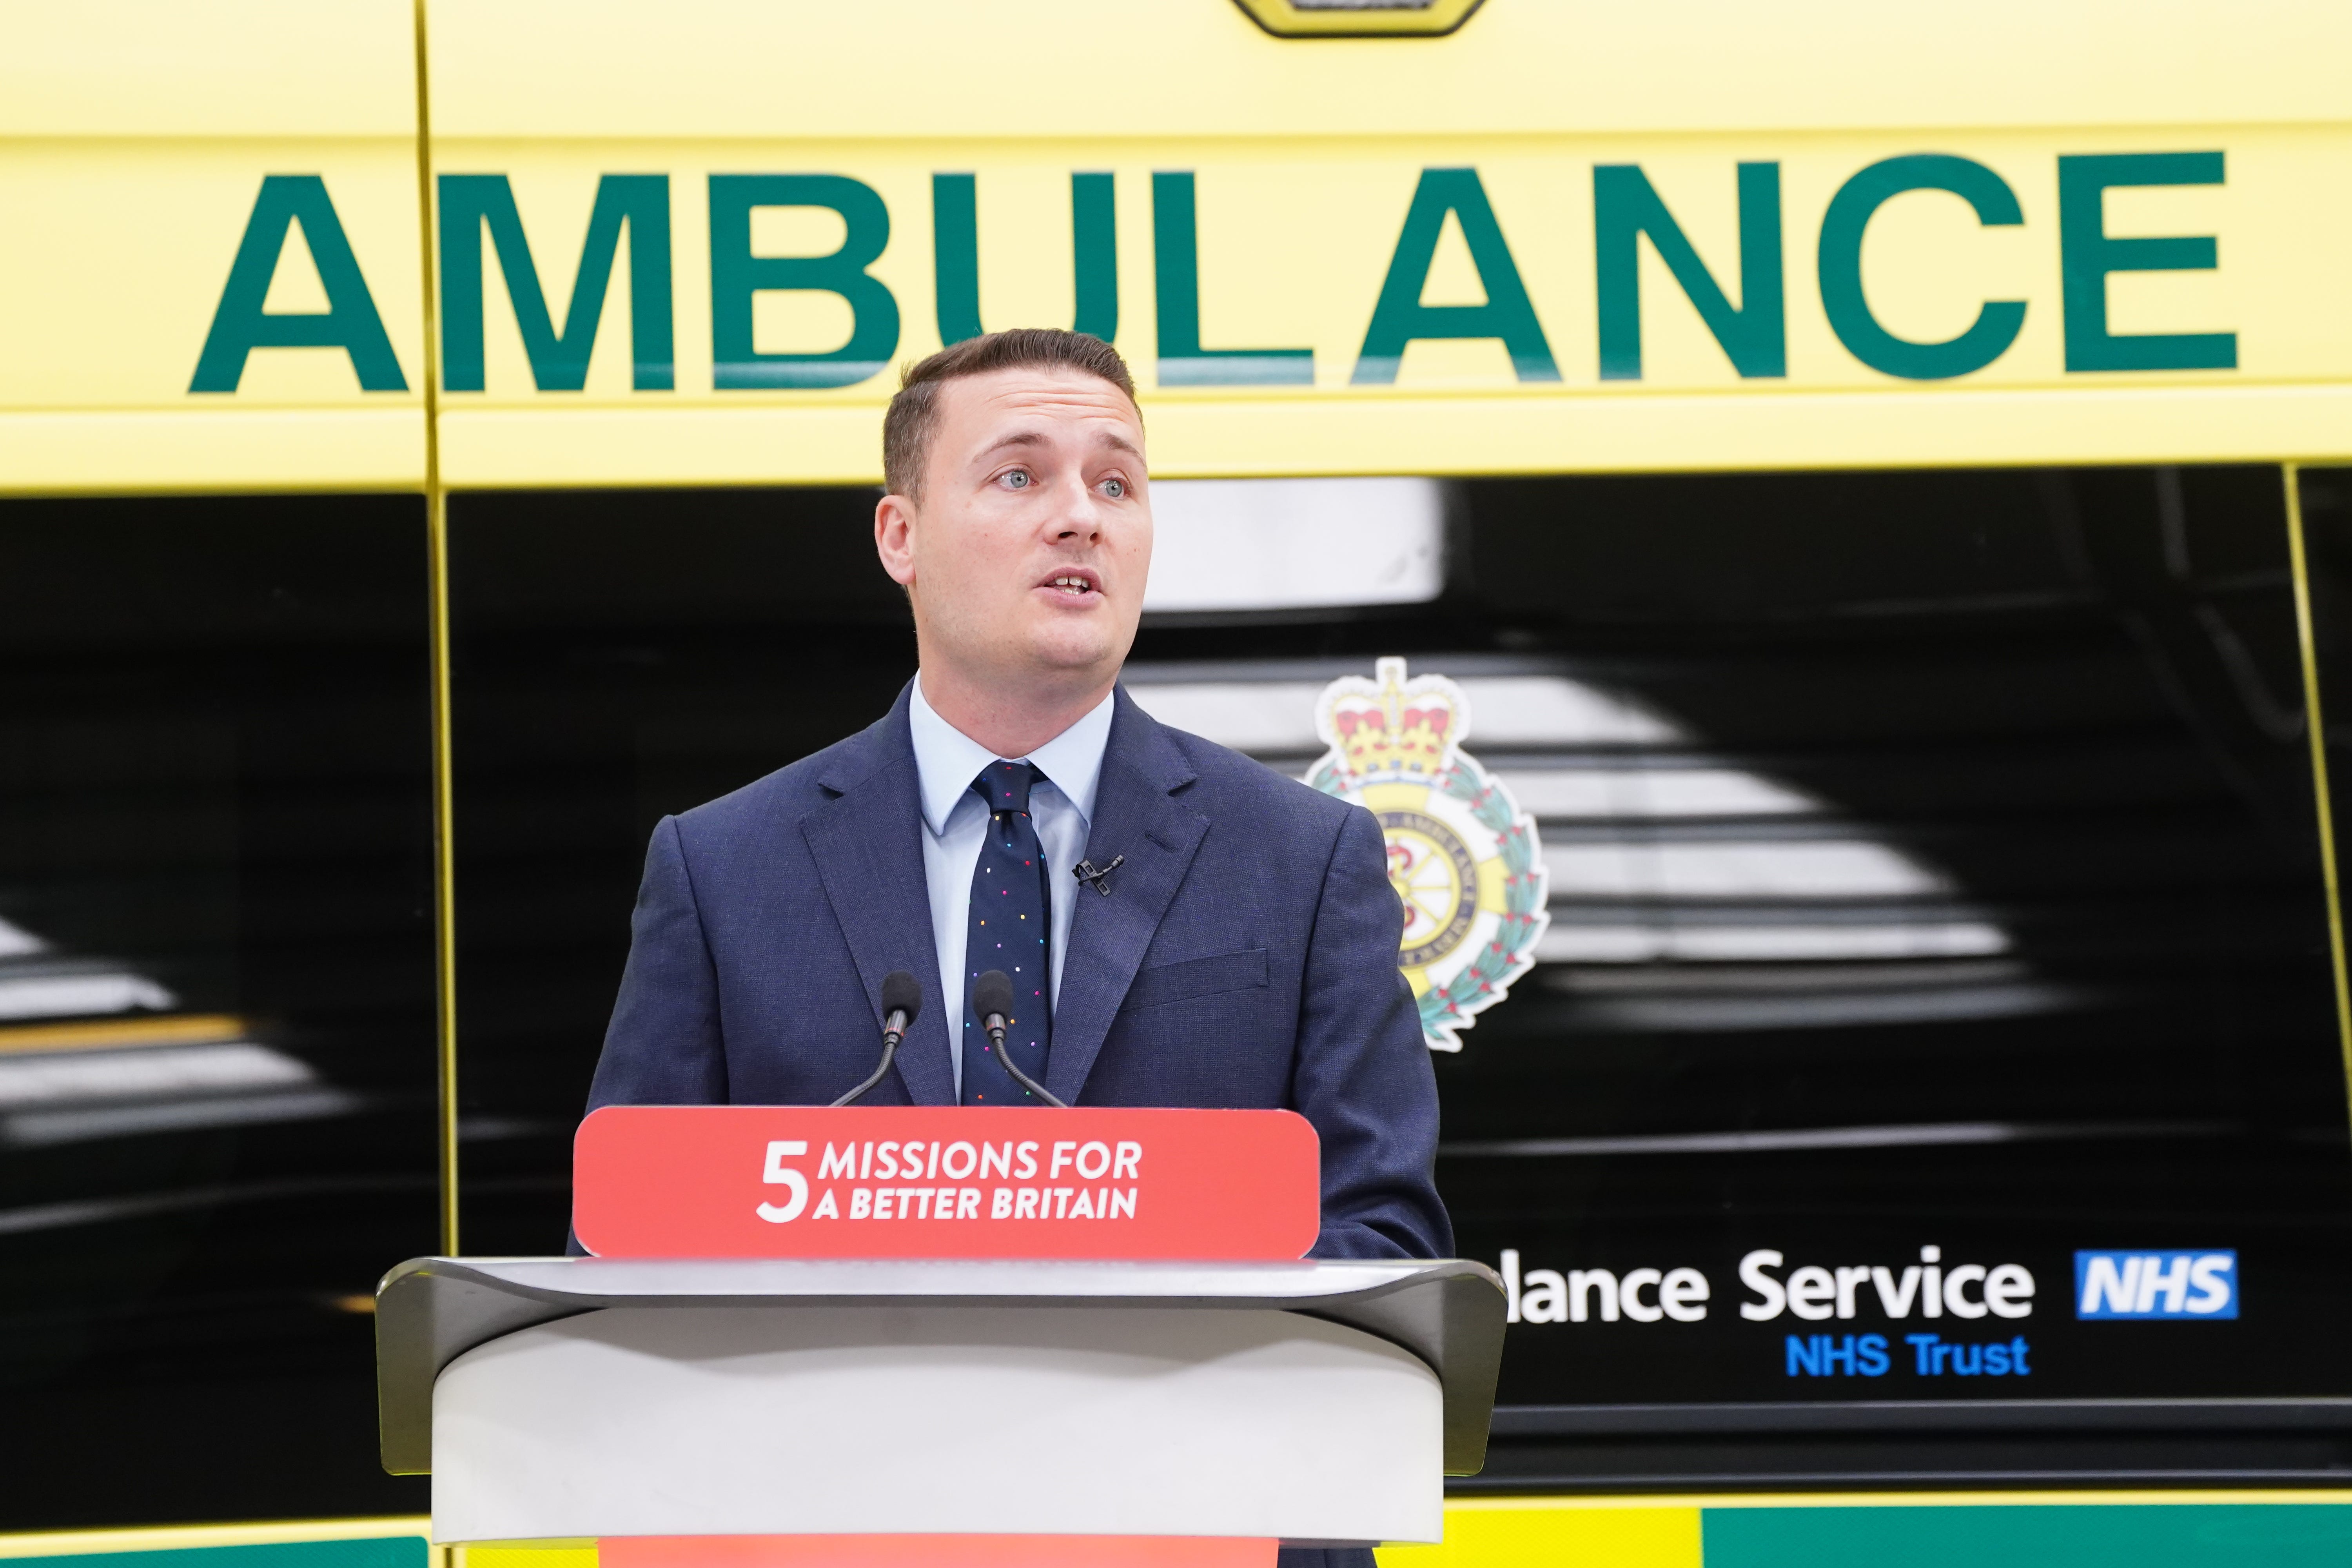 Shadow health secretary Wes Streeting will warn there’s no money to waste